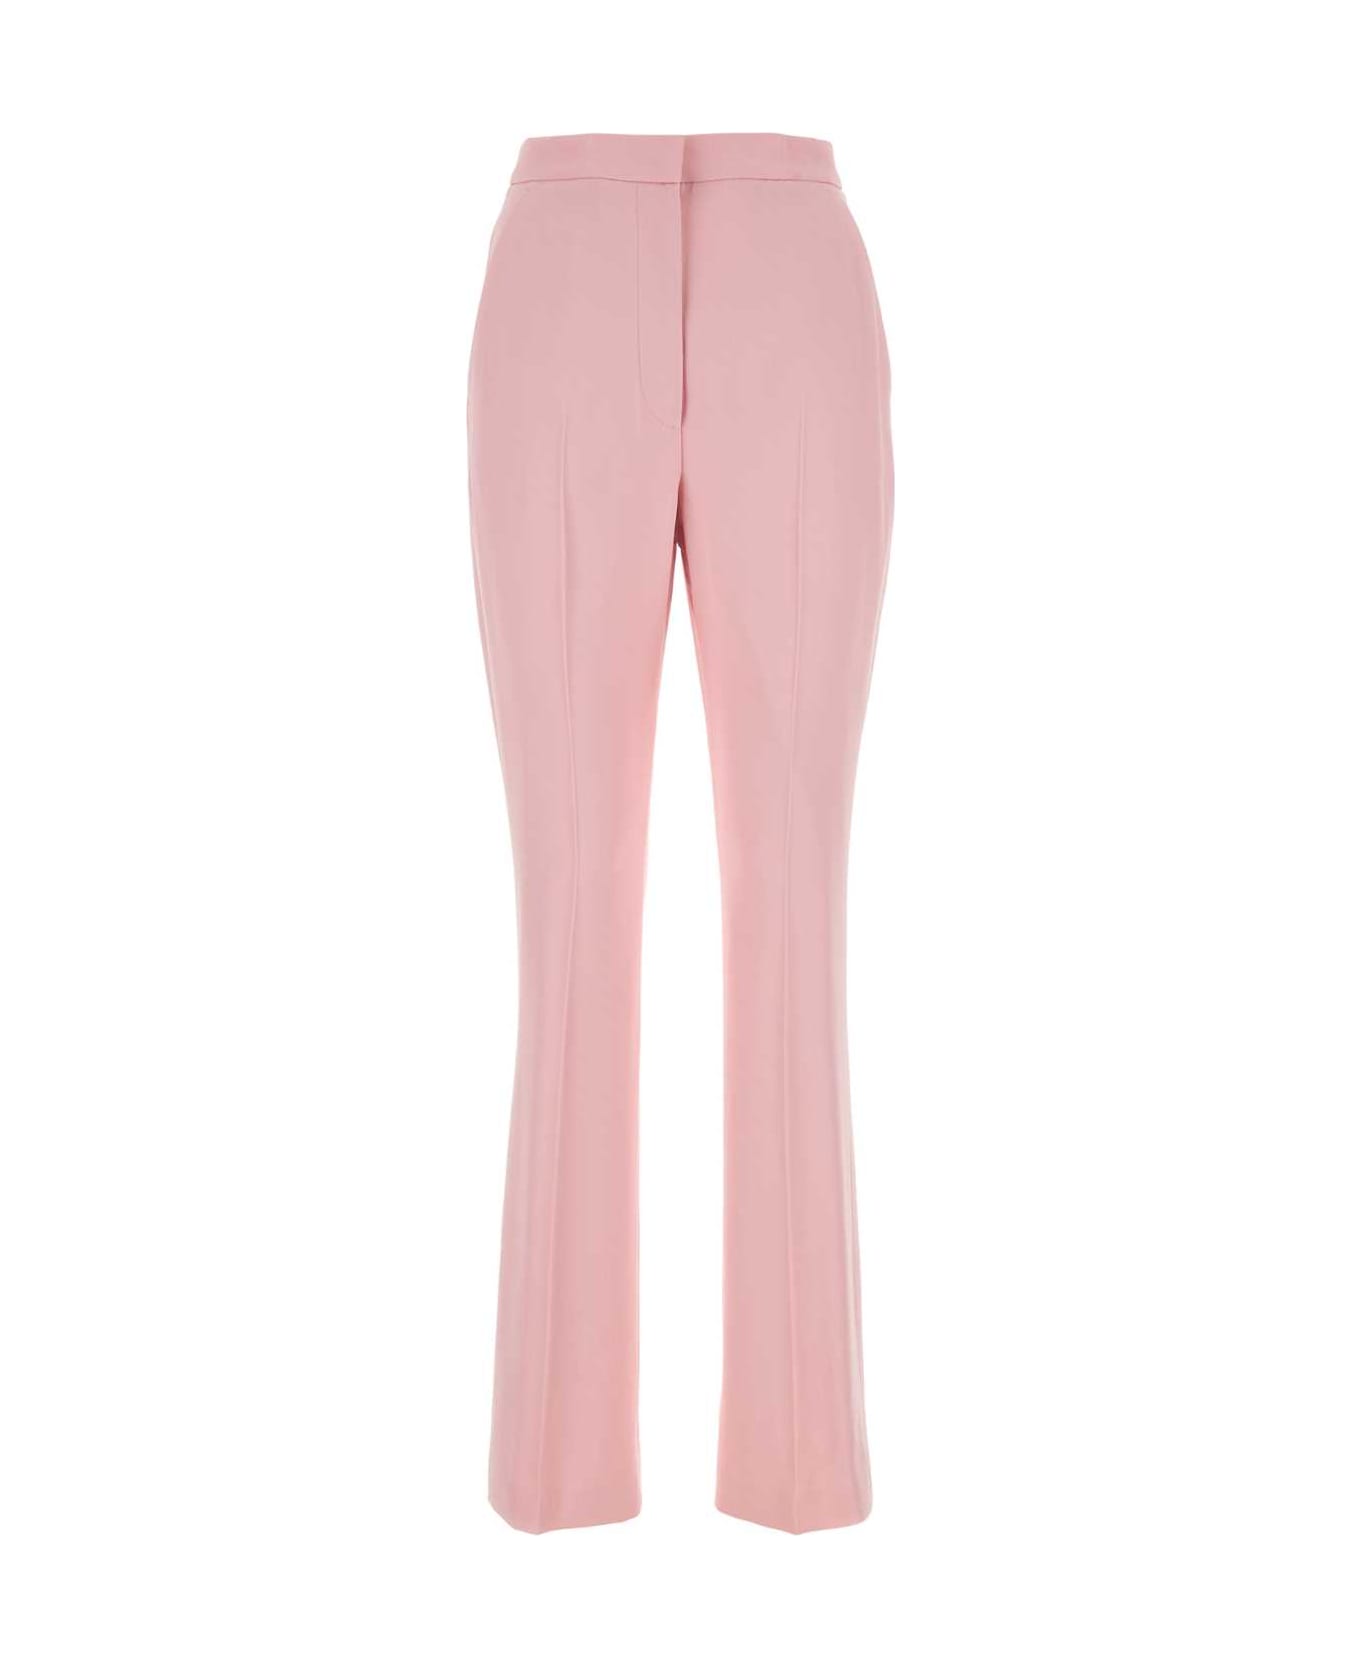 Alexander McQueen Pink Crepe Cigarette Pant - PALEPINK ボトムス